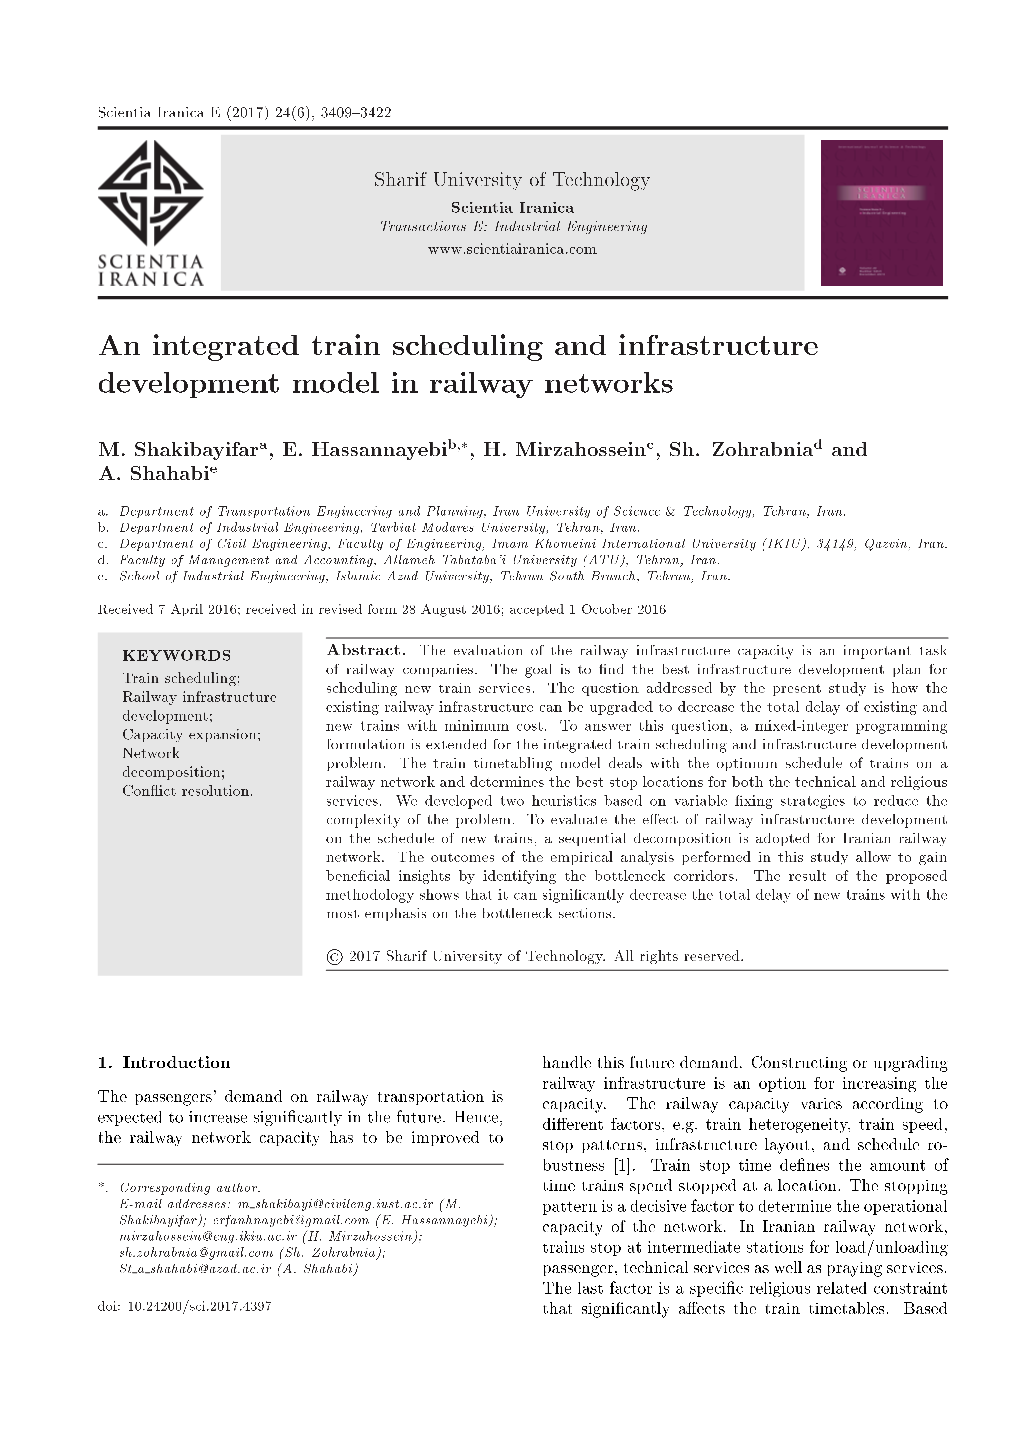 An Integrated Train Scheduling and Infrastructure Development Model in Railway Networks